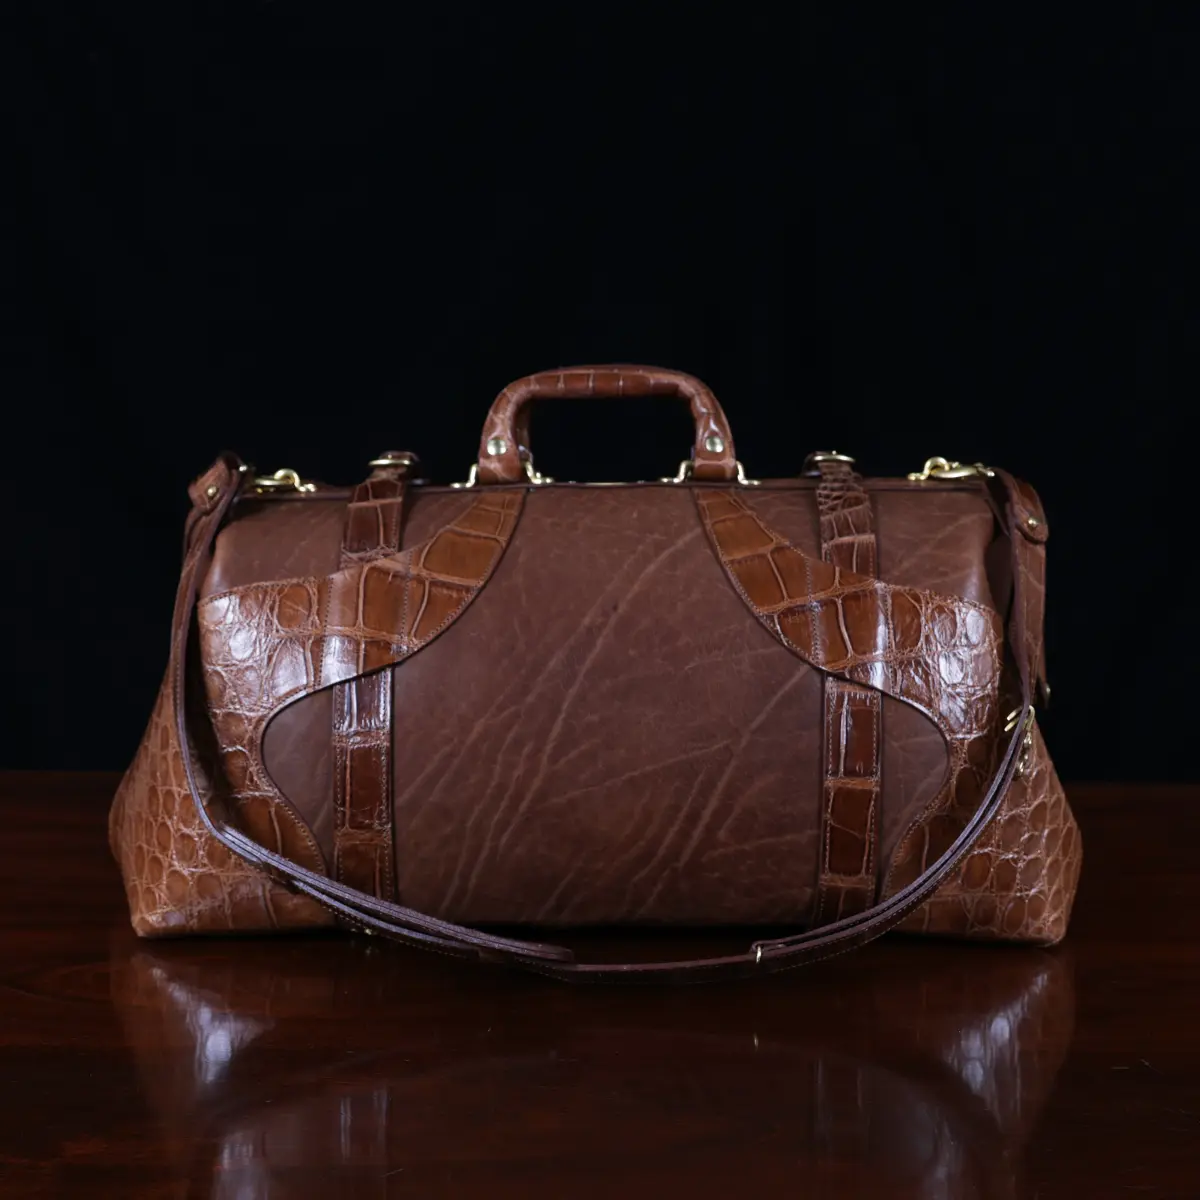 no 5 grip in steerhide with brown american alligator trim - back view - on a wood table with black background - ID 001